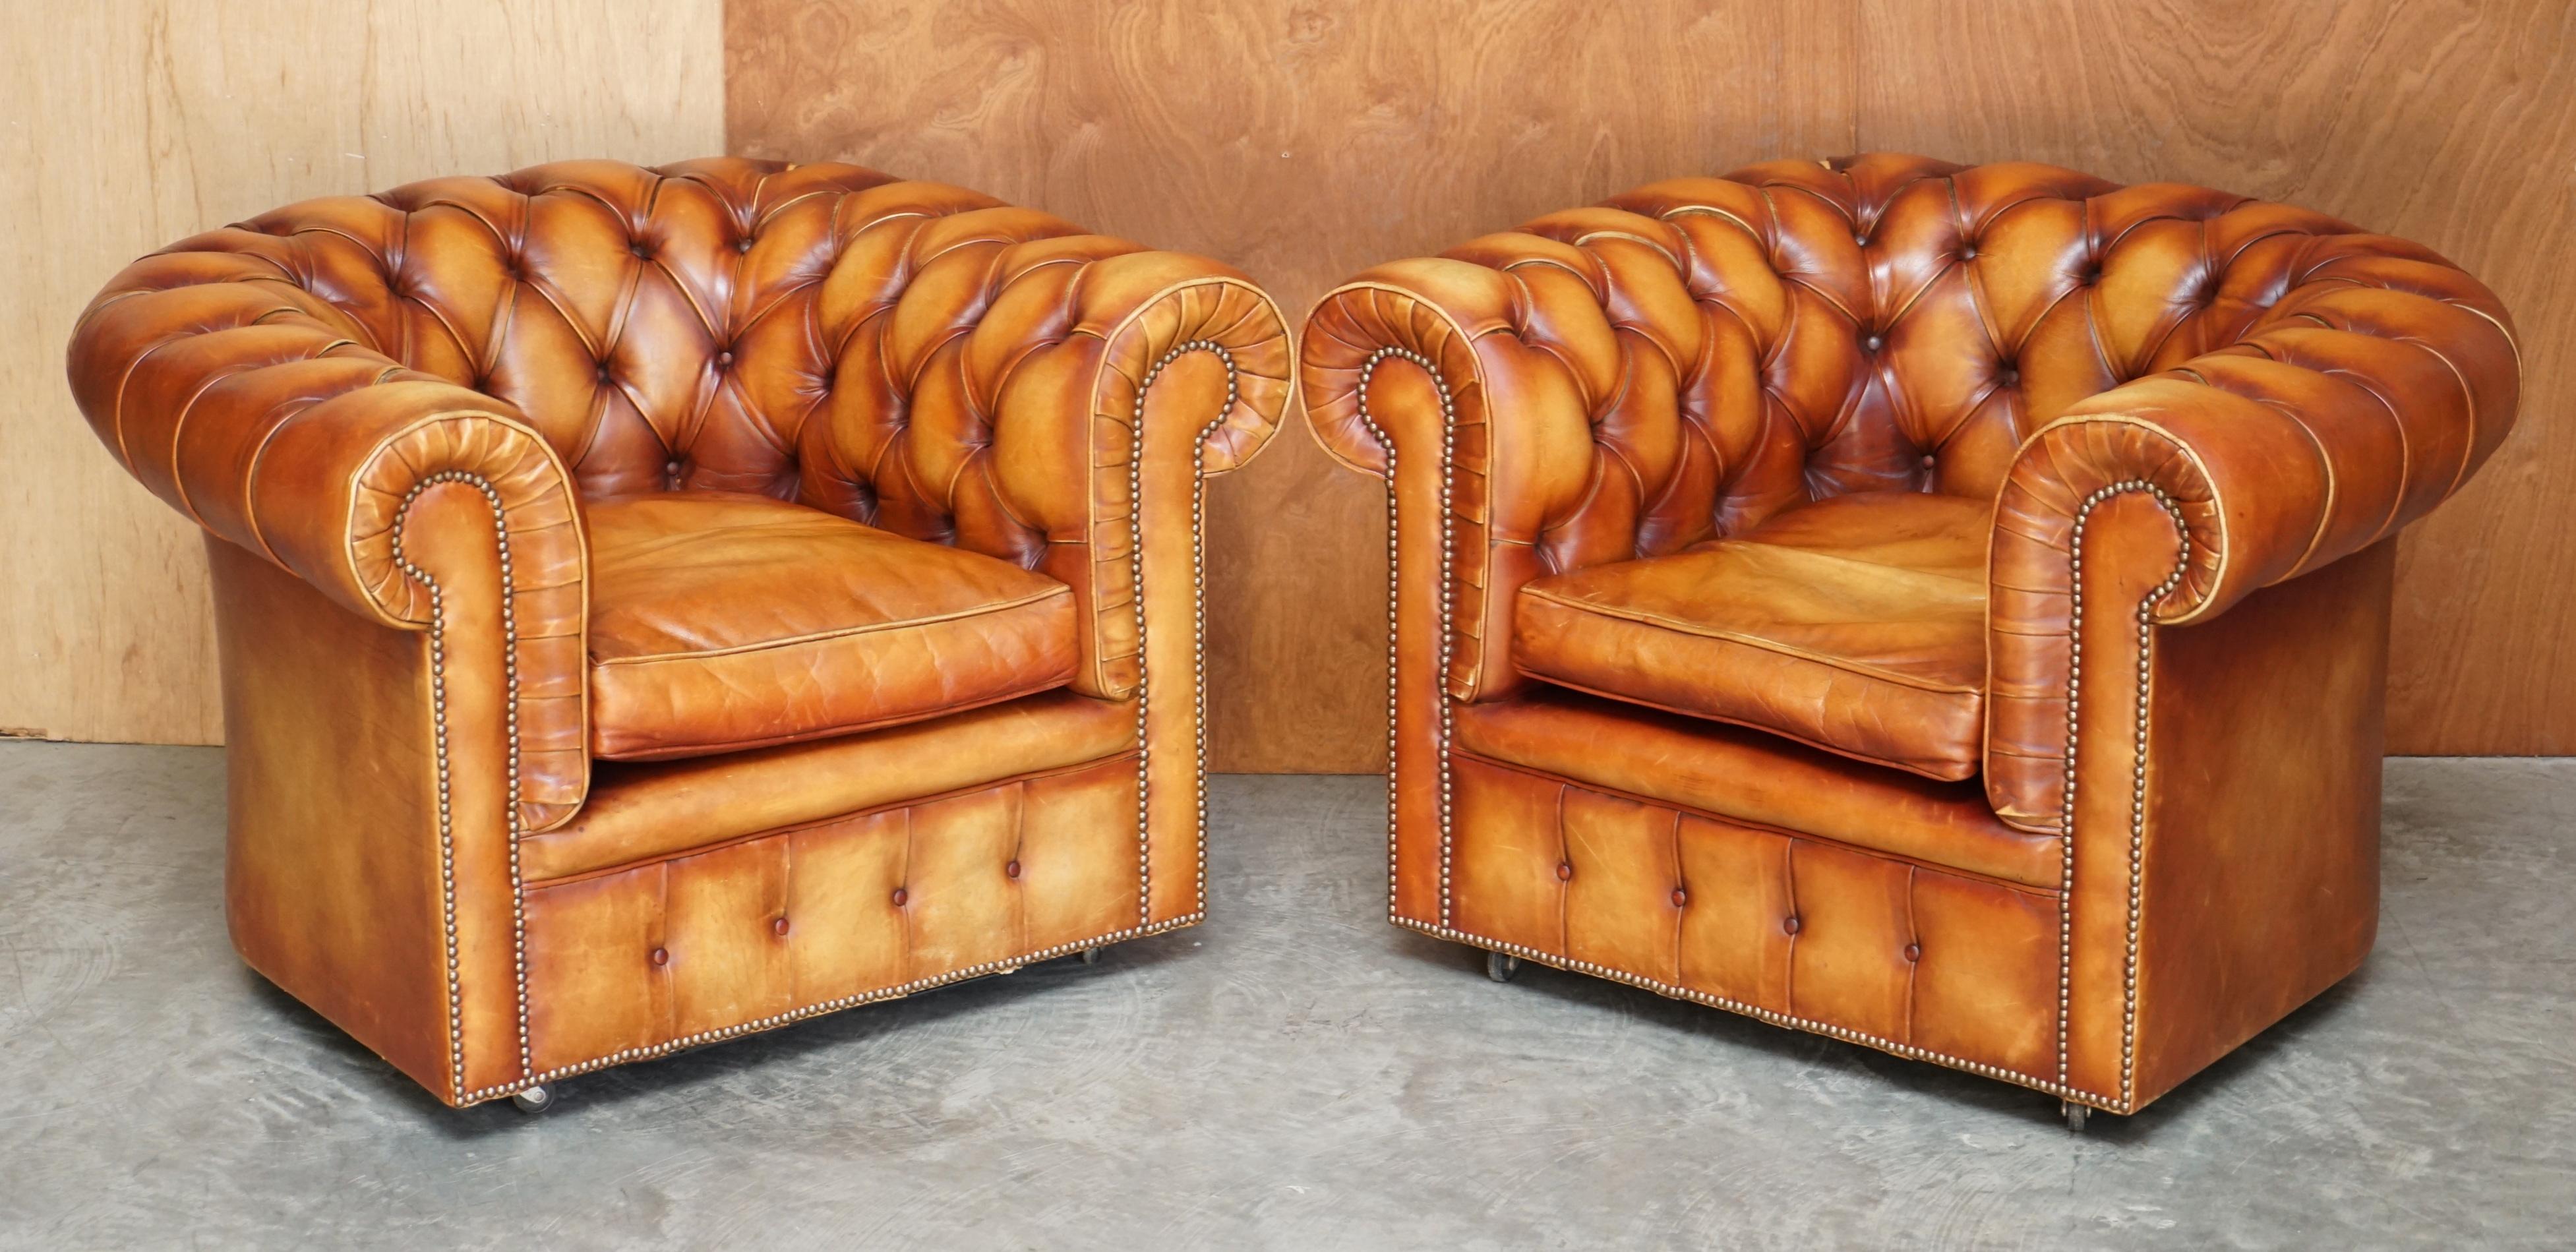 We are delighted to offer for sale this stunning vintage restored Chesterfield cigar brown leather Library suite

A very rare find, I never come across original sets of three pieces from this era. This is an original hand dyed suite which means it